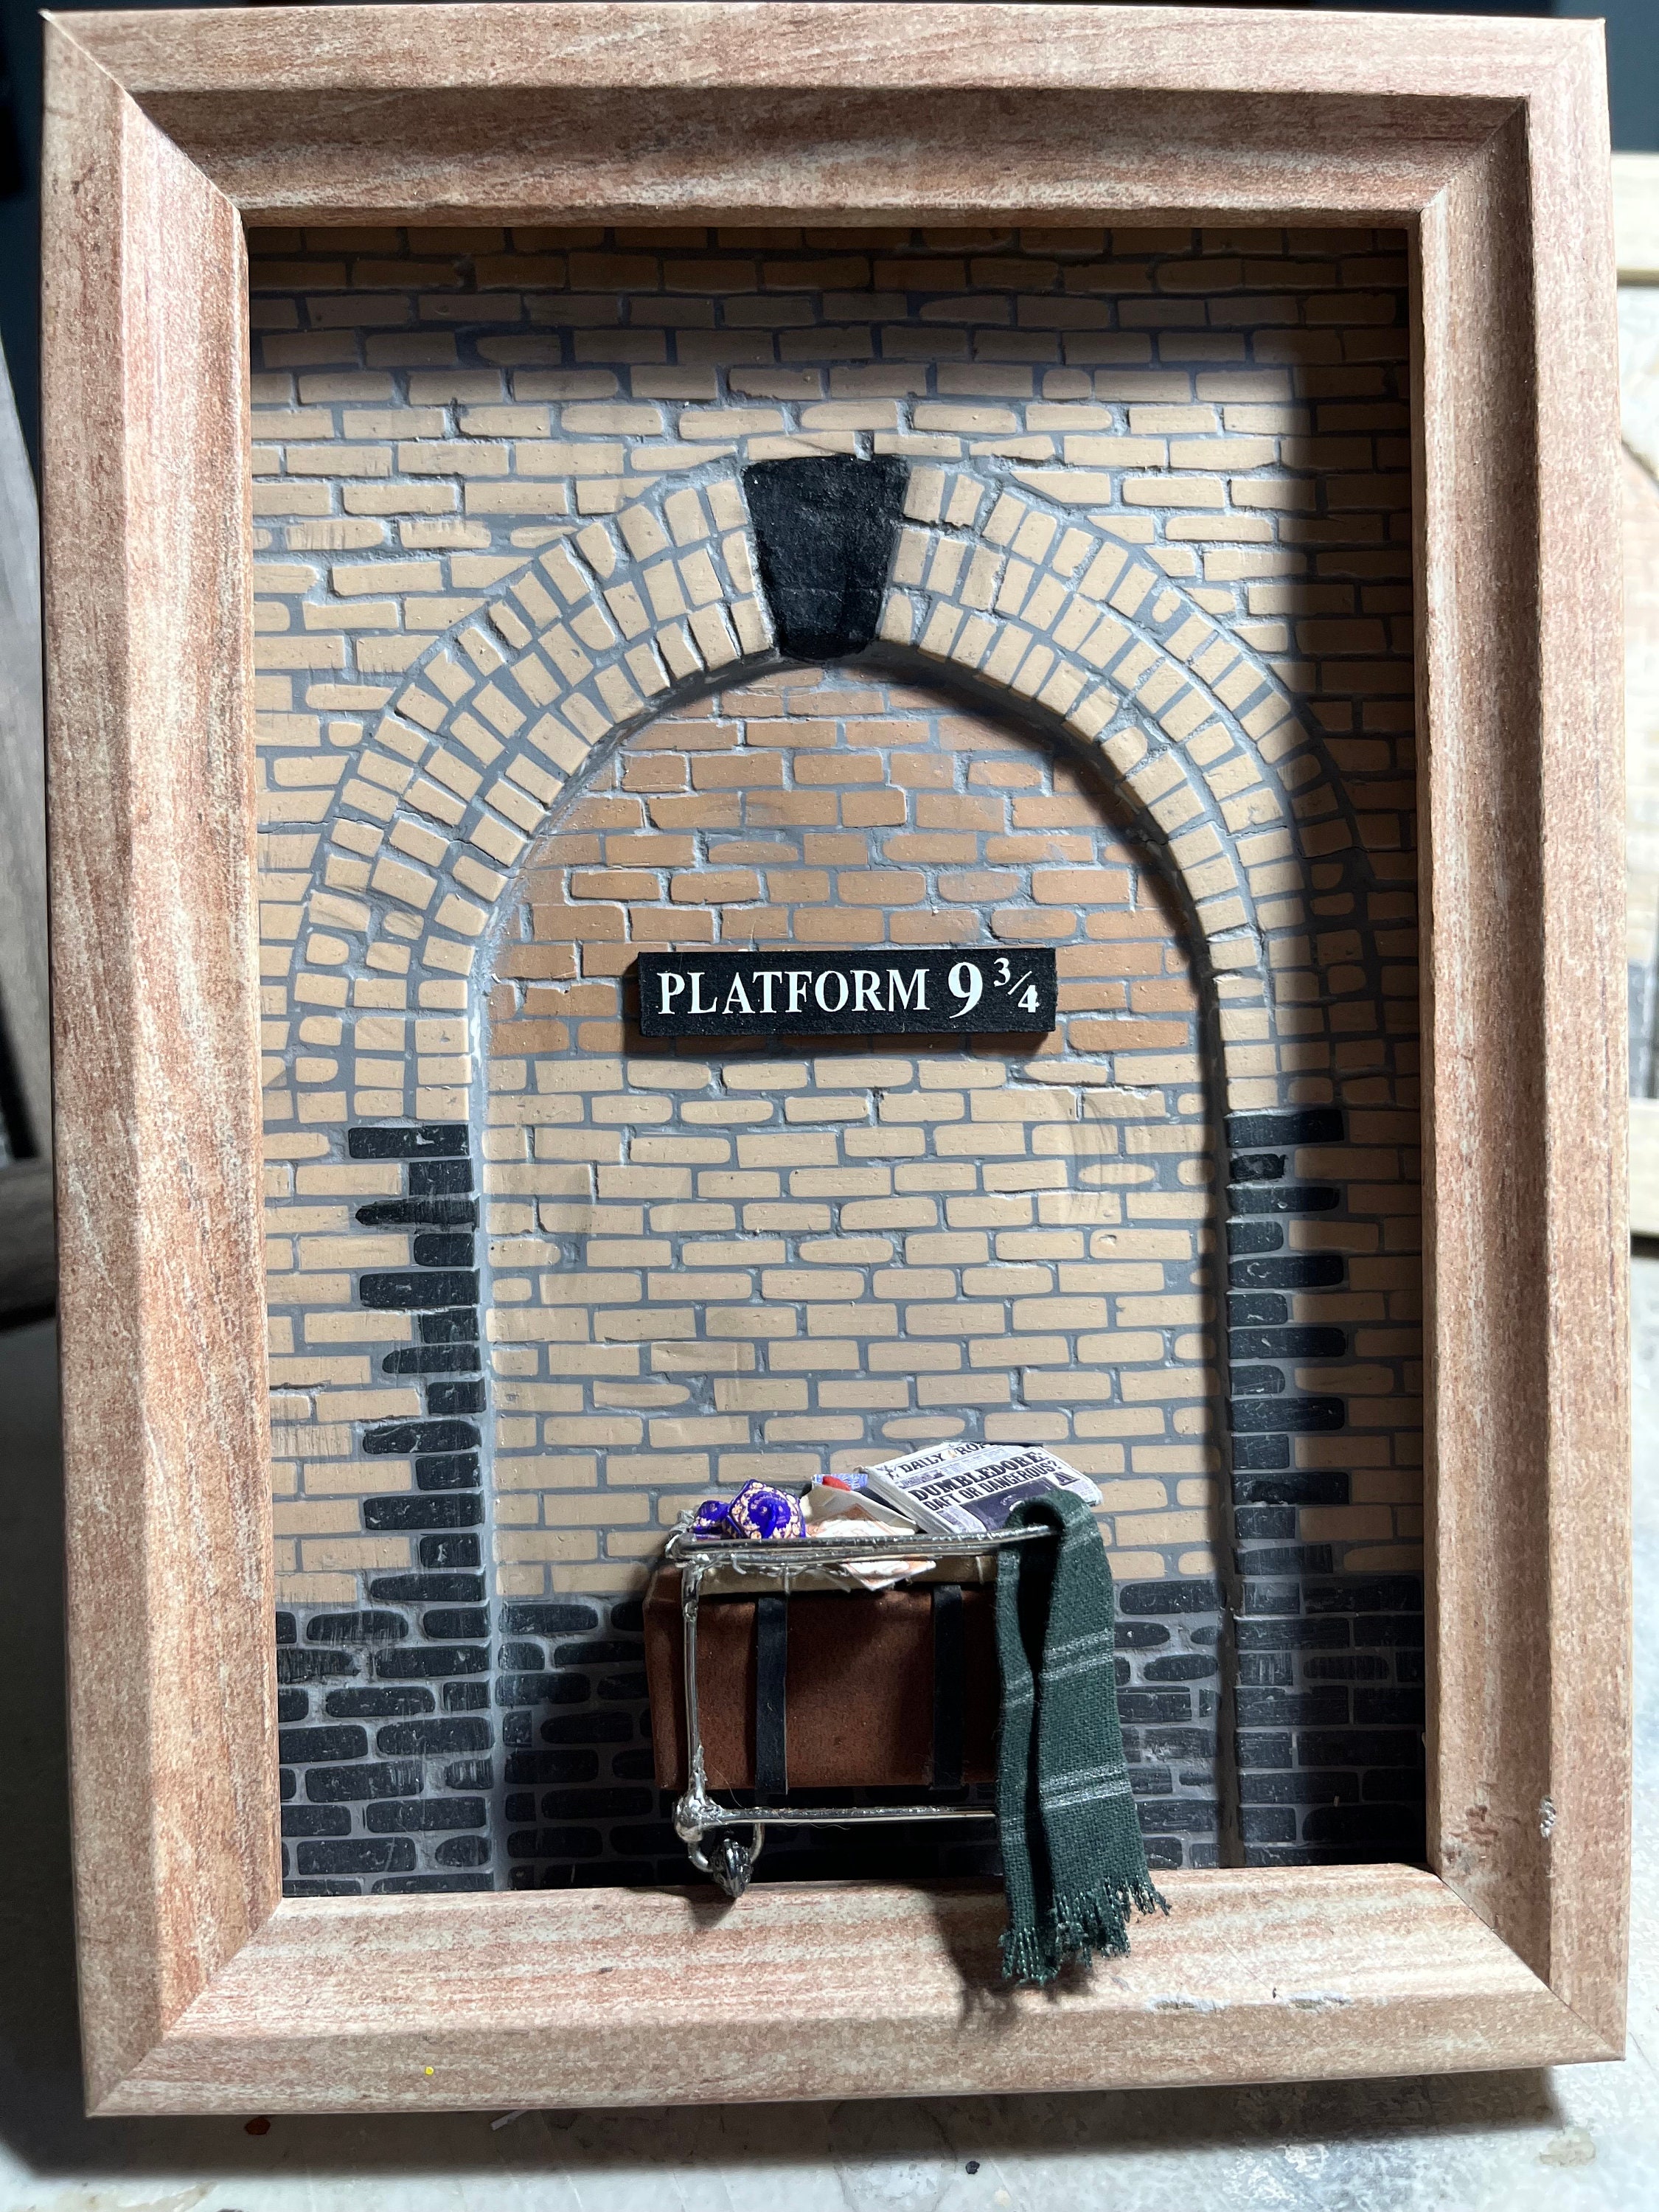  Brick Wall Backdrop,Platform 9 and 3/4 King's Cross, Photo  Booth Props Brick Wall Background, Suitable for Outdoor and Indoor use, Fan  Love, Birthday Gifts, Party Supplies. : Electronics